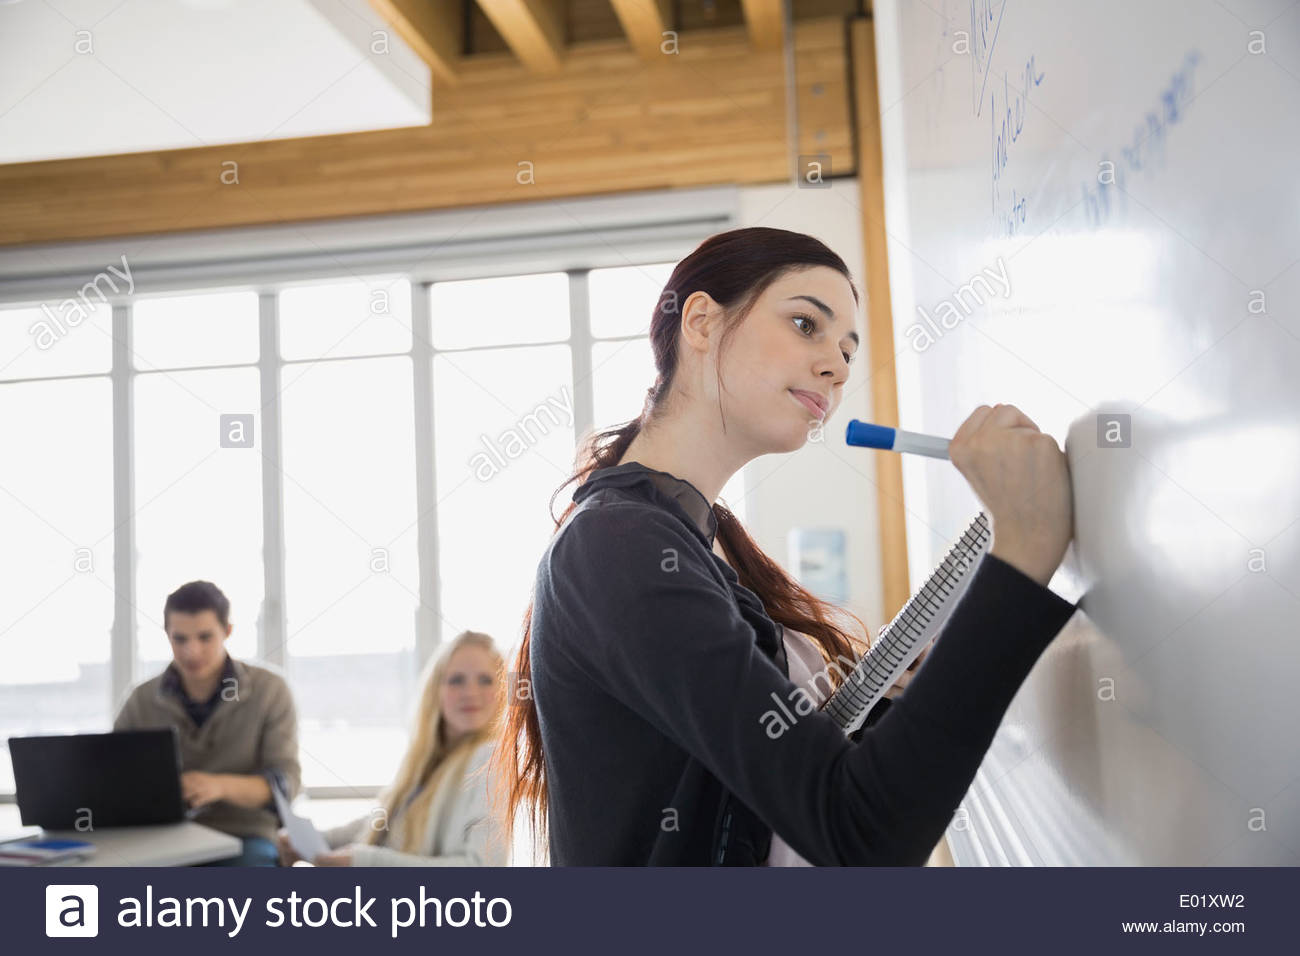 High school student at whiteboard in classroom Stock Photo